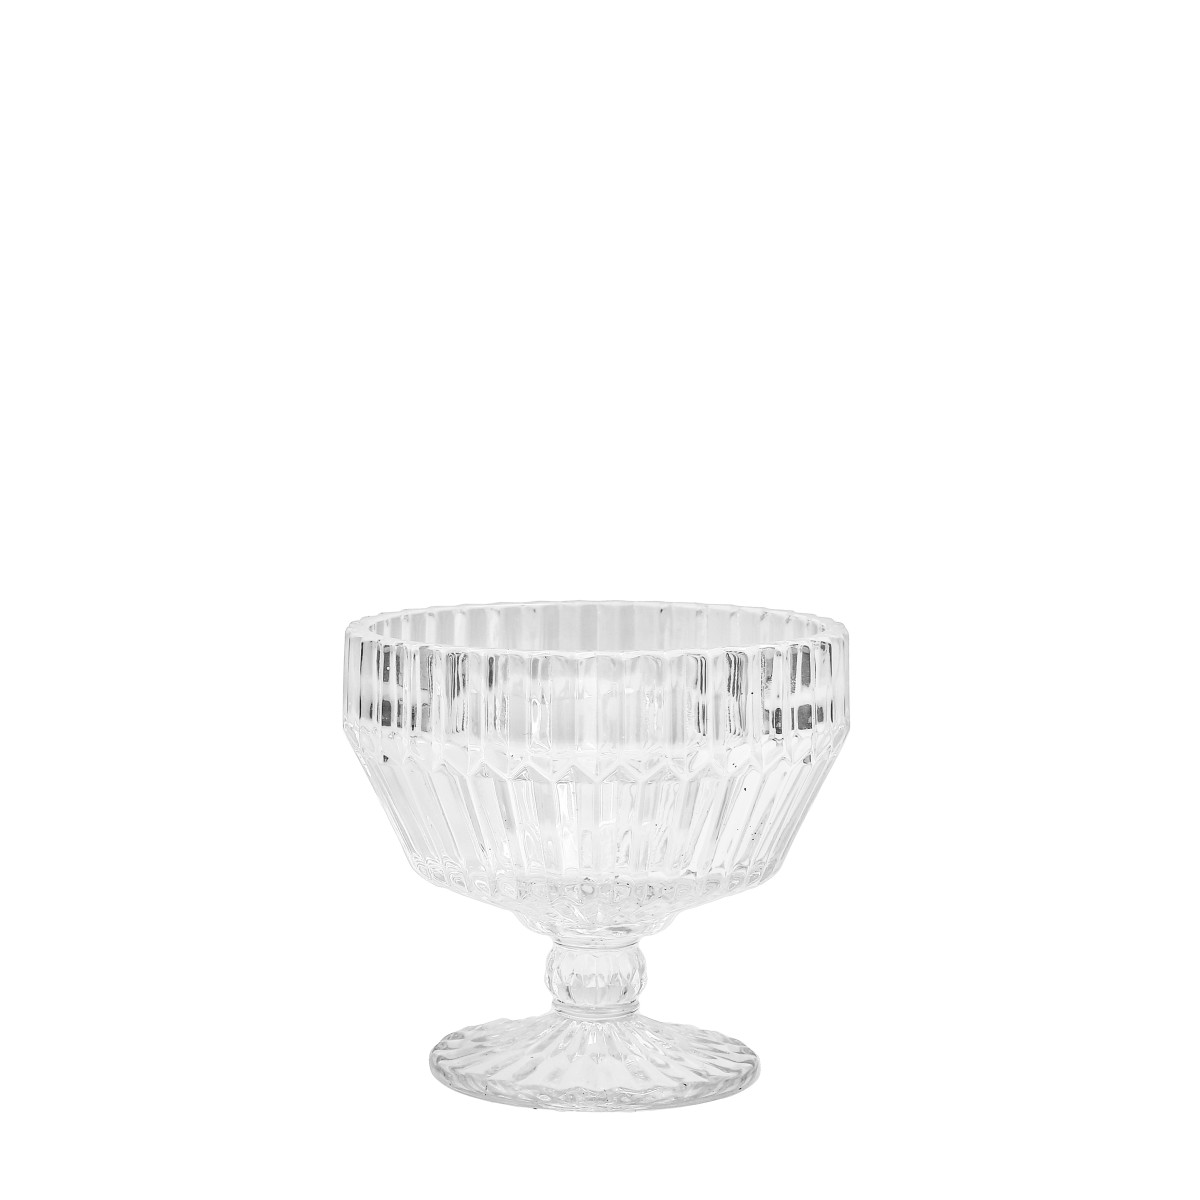 Archie Clear Footed Dessert Bowl 10oz